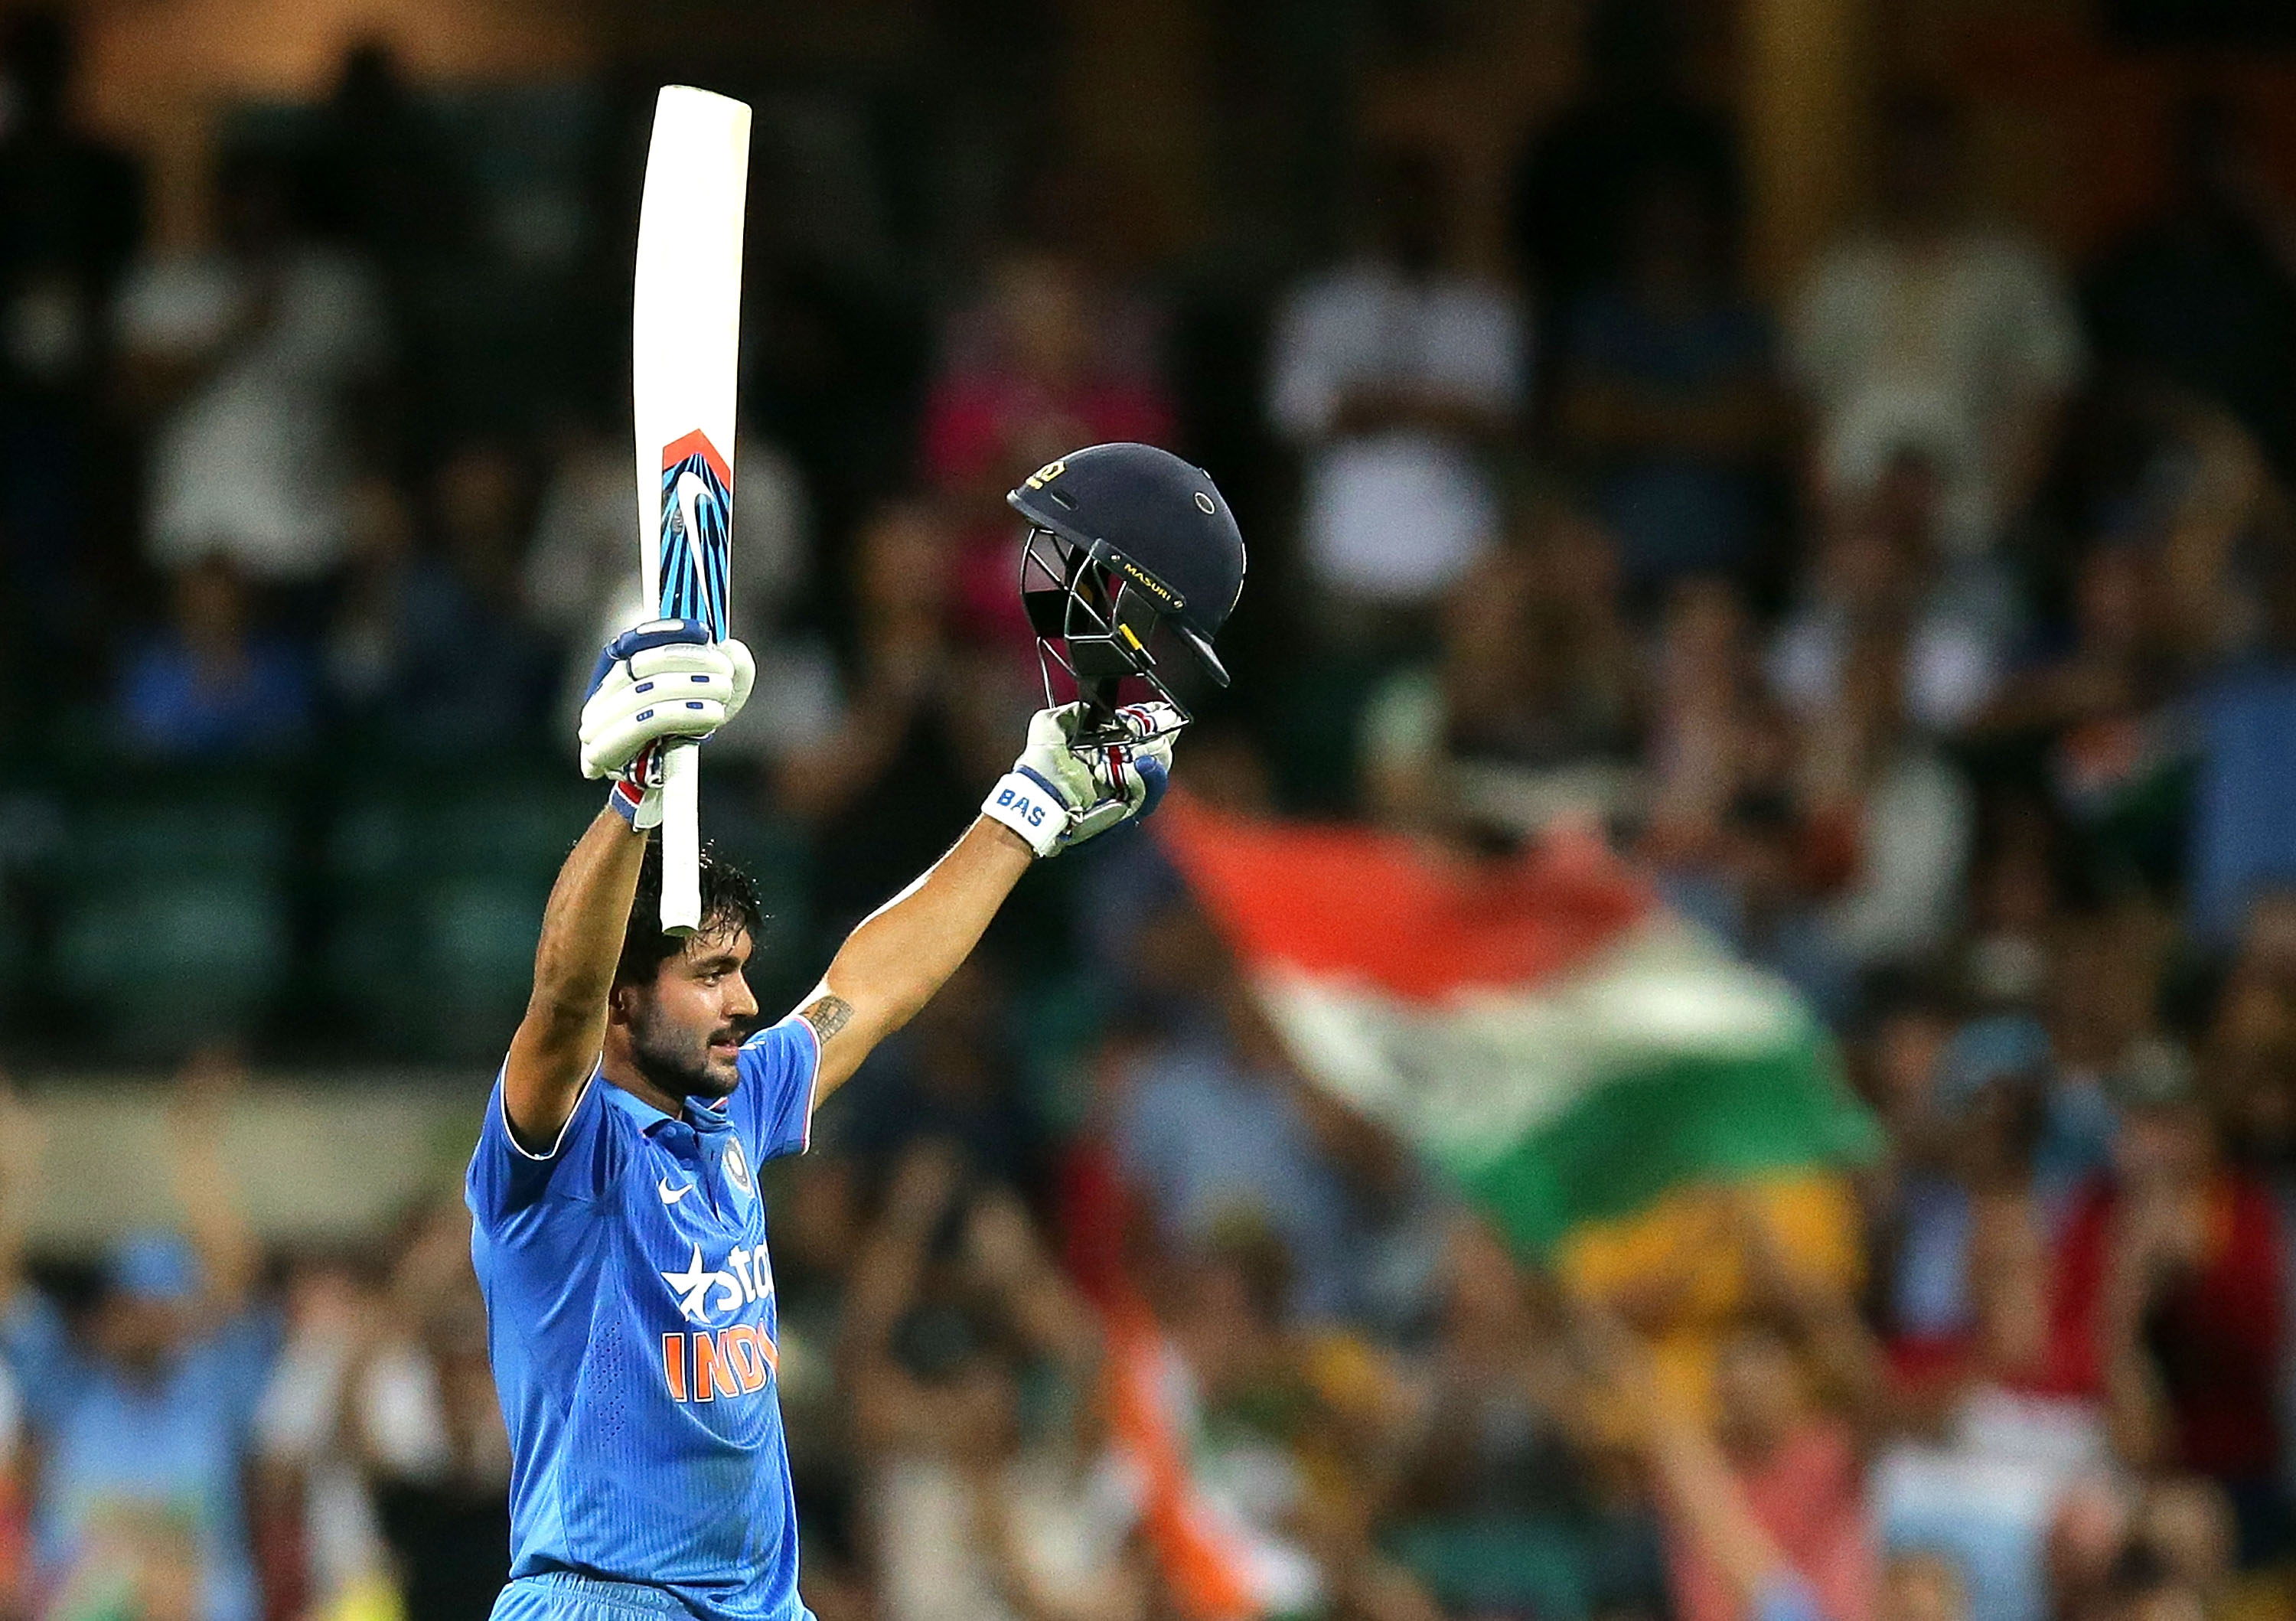 Manish Pandey shines as India A take unassailable 3-0 lead against South Africa A